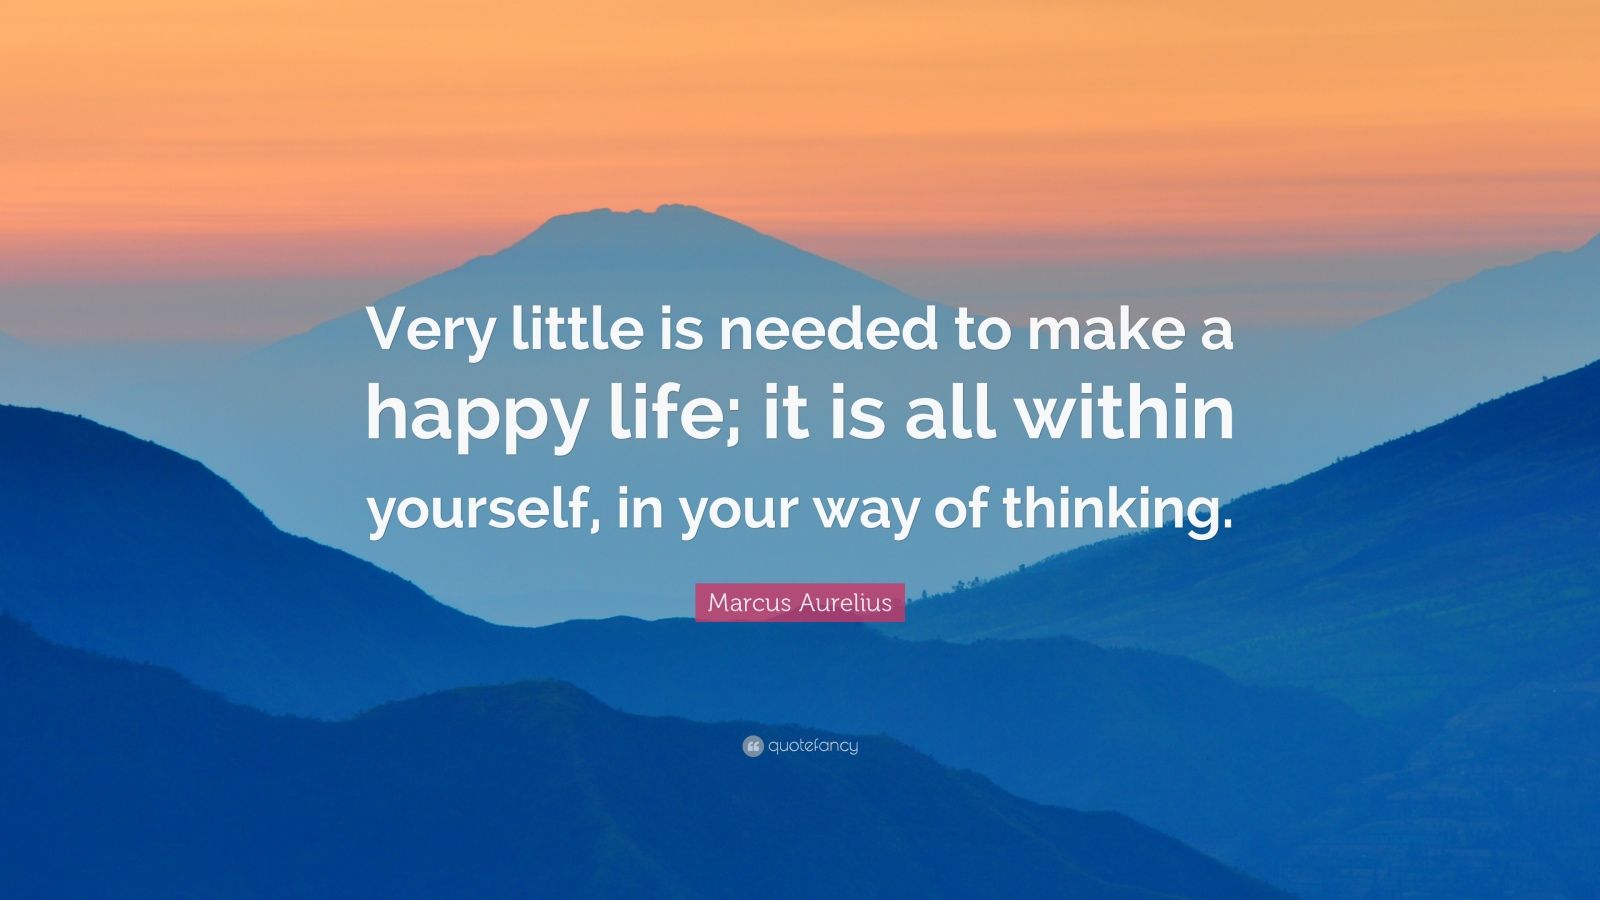 Marcus Aurelius Quote: “Very little is needed to make a happy life; it